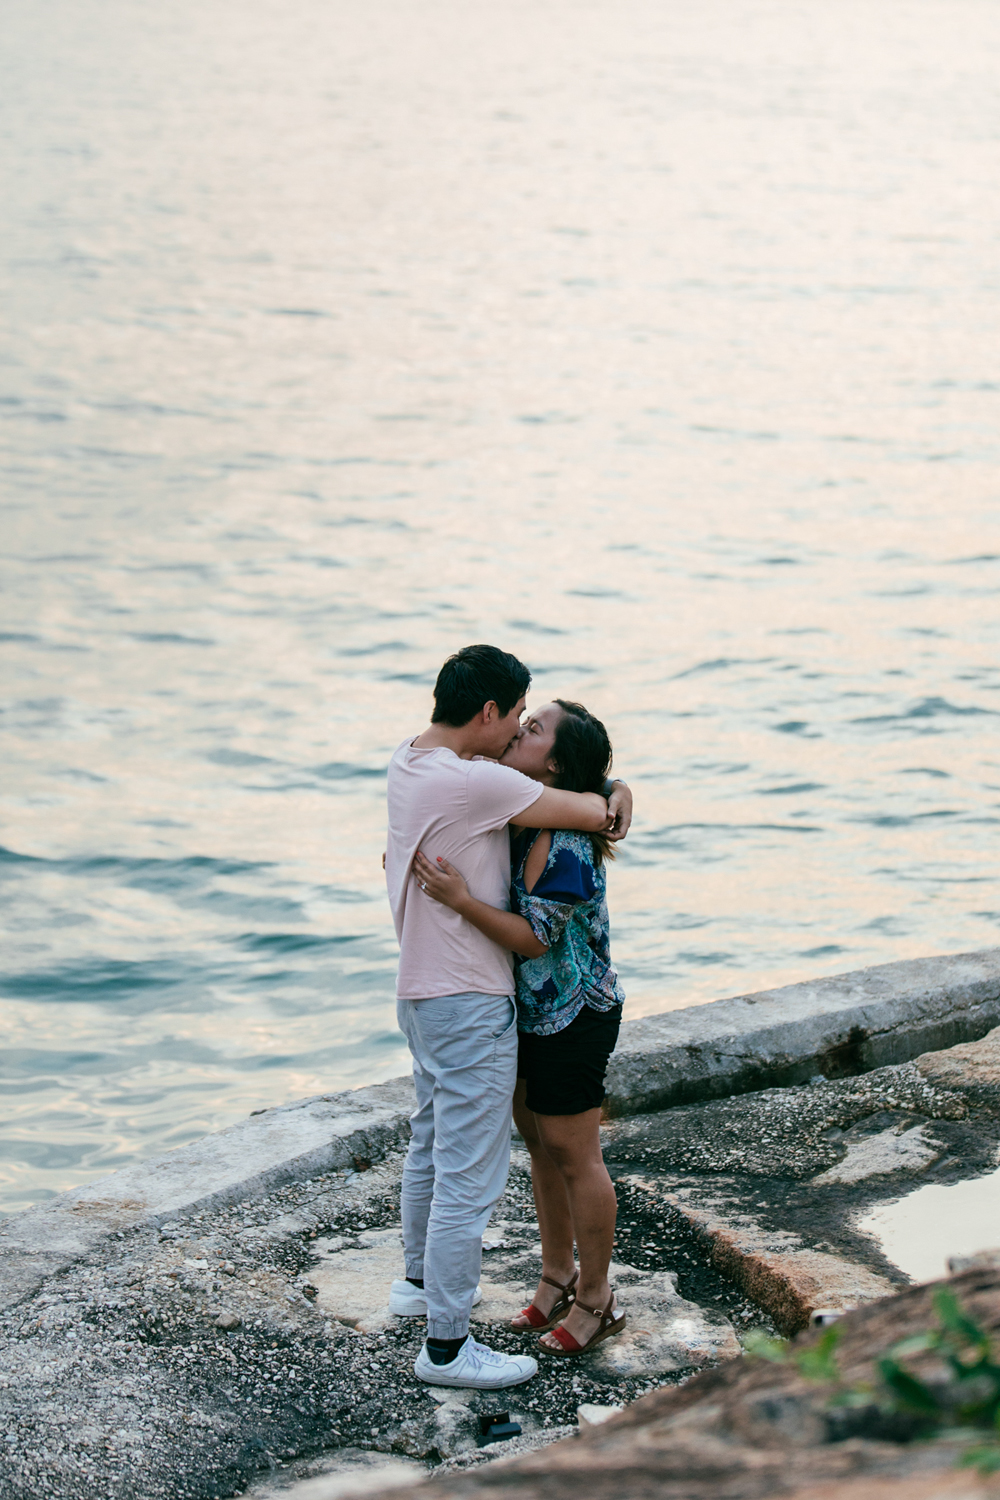 A hug and a kiss | Candid engagement photography | Tracy Wong